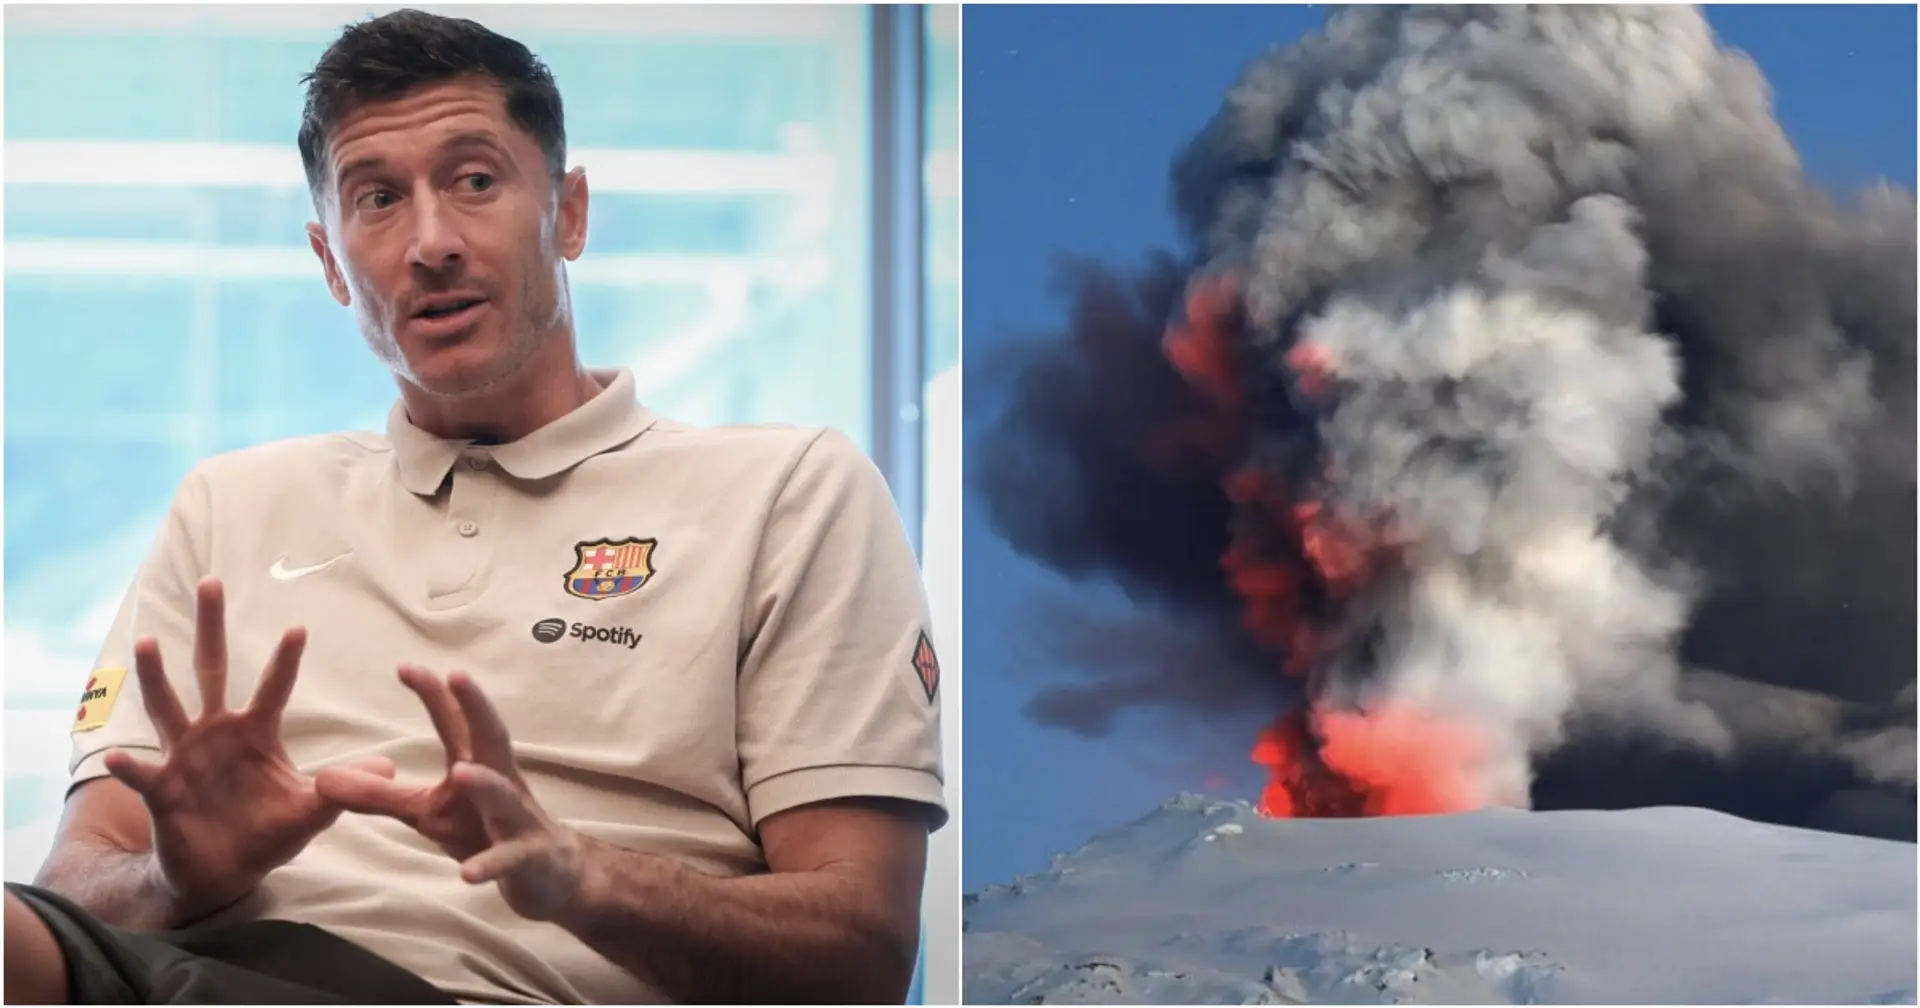 How Lewandowski's career was affected by volcano eruption - it would've been totally different